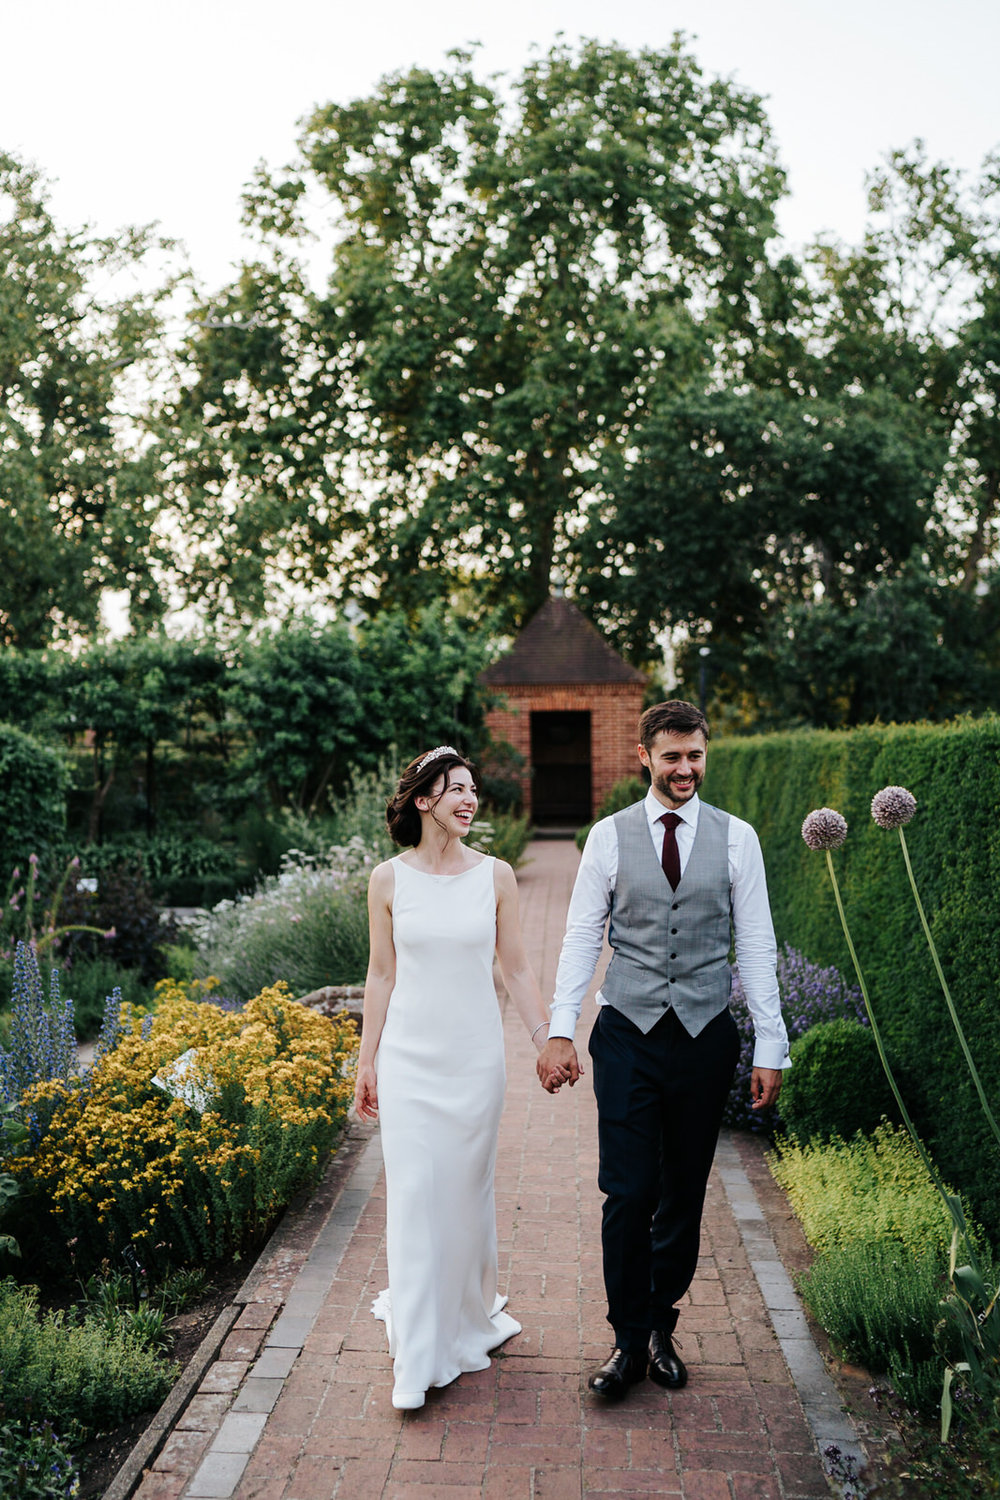  Bride and groom hold hands and walk around the gardens of kew palace in golden evening light 